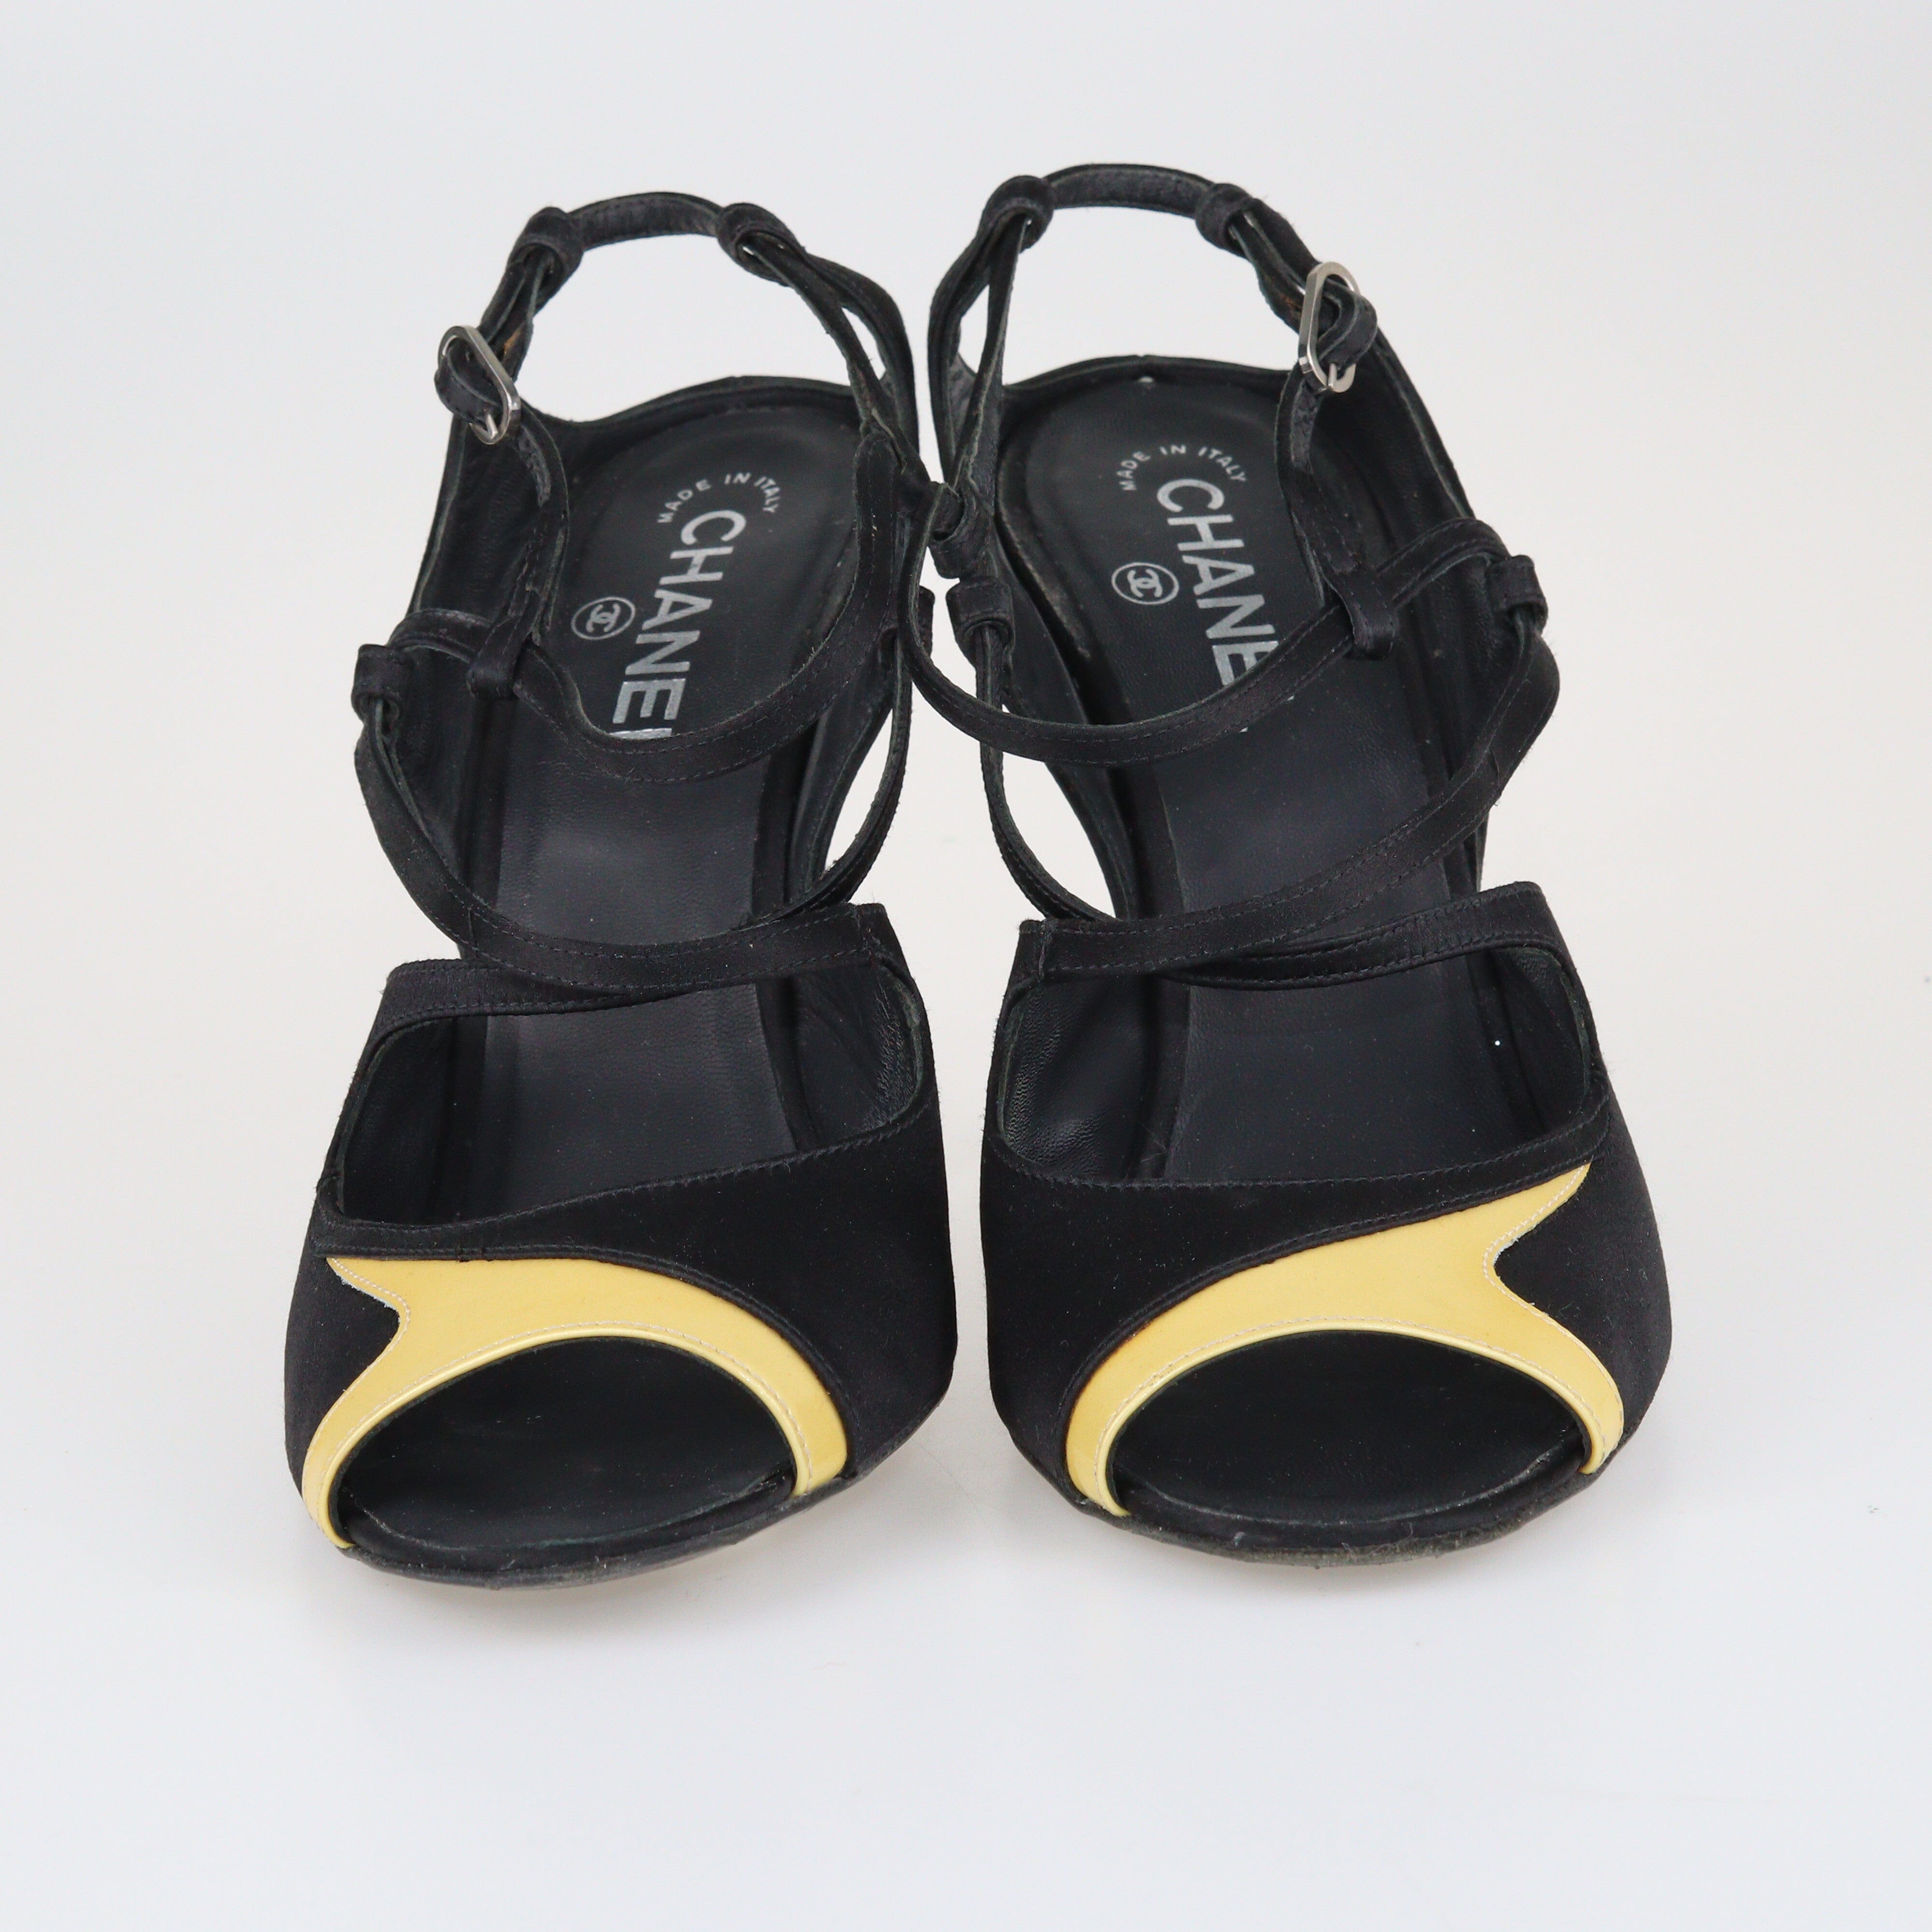 Black/Yellow Open Toe Ankle Strap Sandals Shoes Chanel 